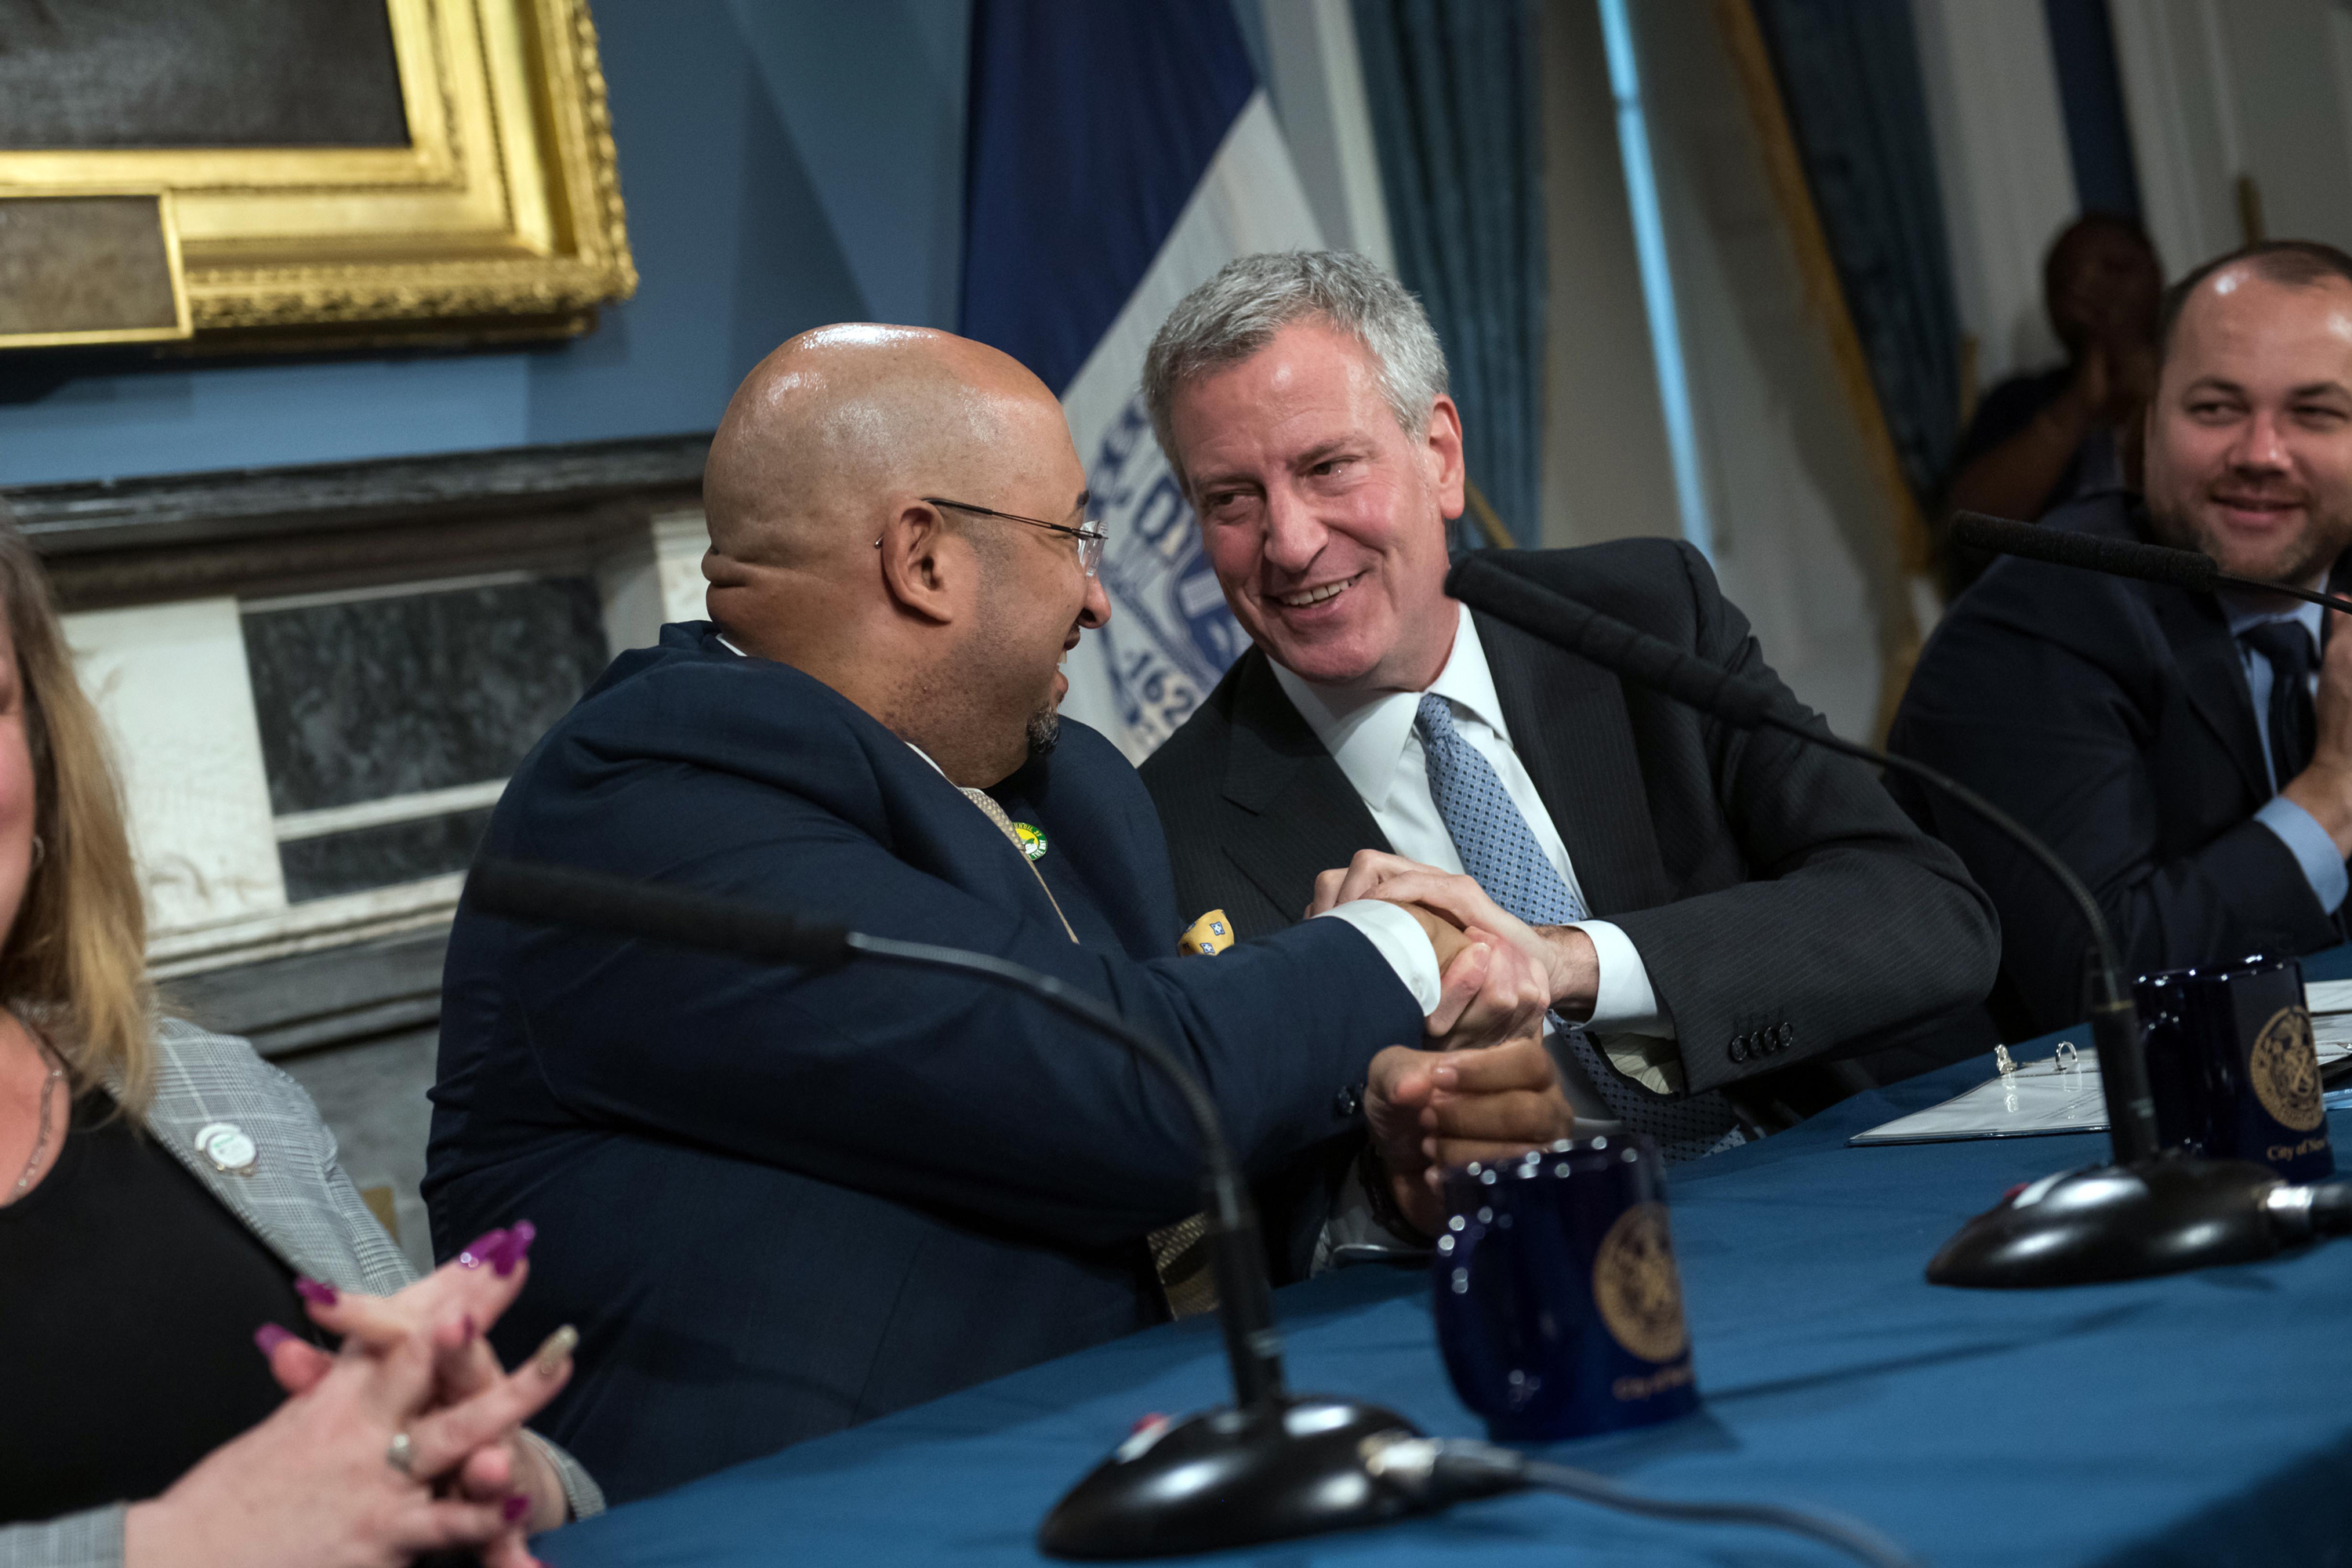 Mayor Bill de Blasio shakes hands with District Council 37 Executive Director Henry Garrido after announcing a contract agreement in 2019.